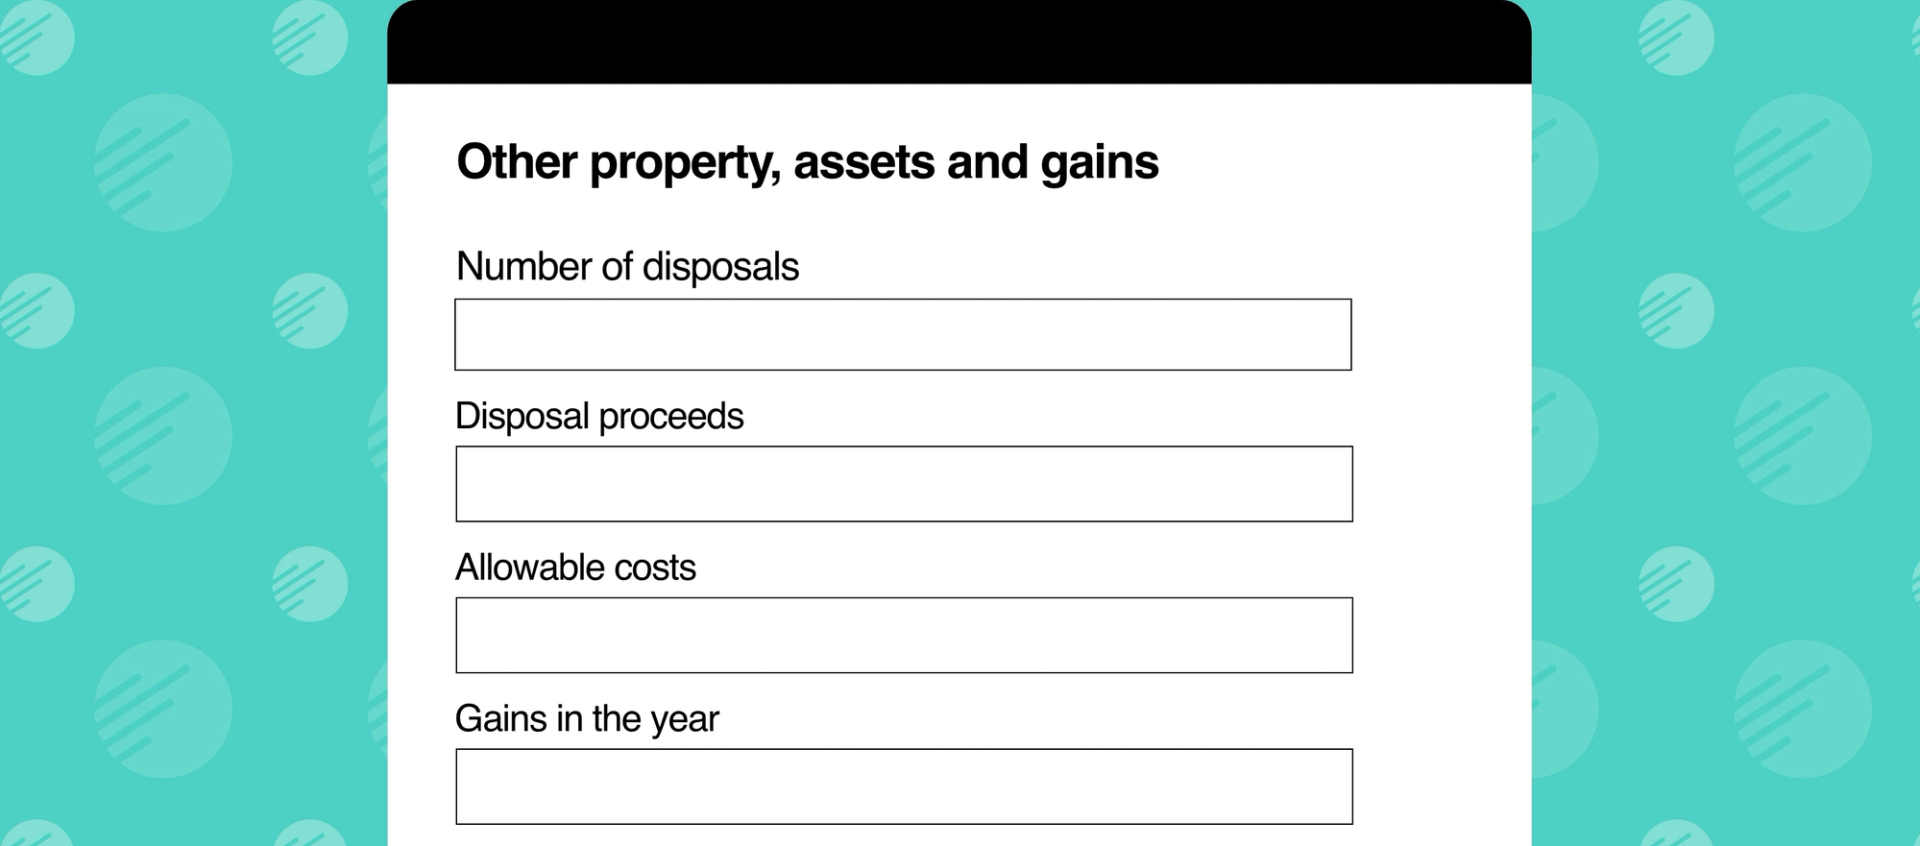 Screenshot of tax form for "Other property, assets and gains"